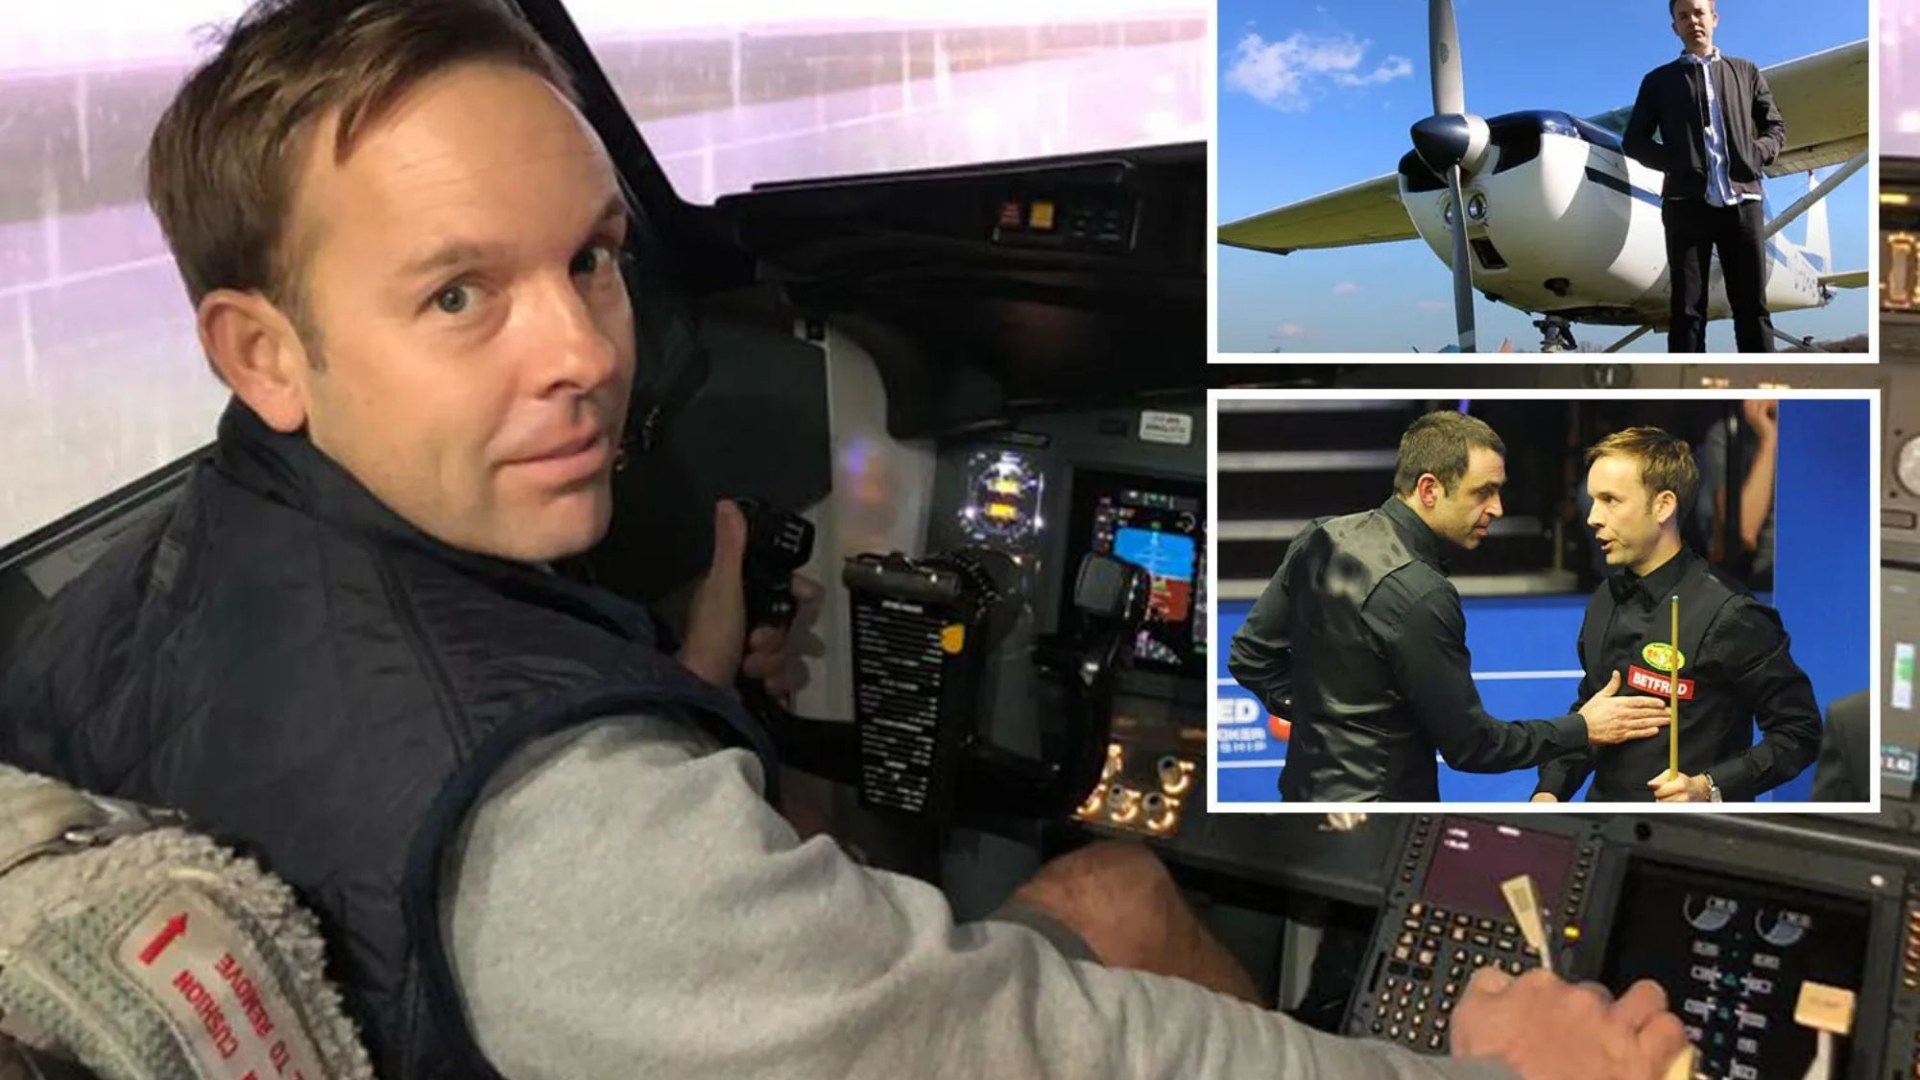 World Championship finalist and Ronnie O’Sullivan rival, 44, is a qualified pilot who wants career change after snooker [Video]